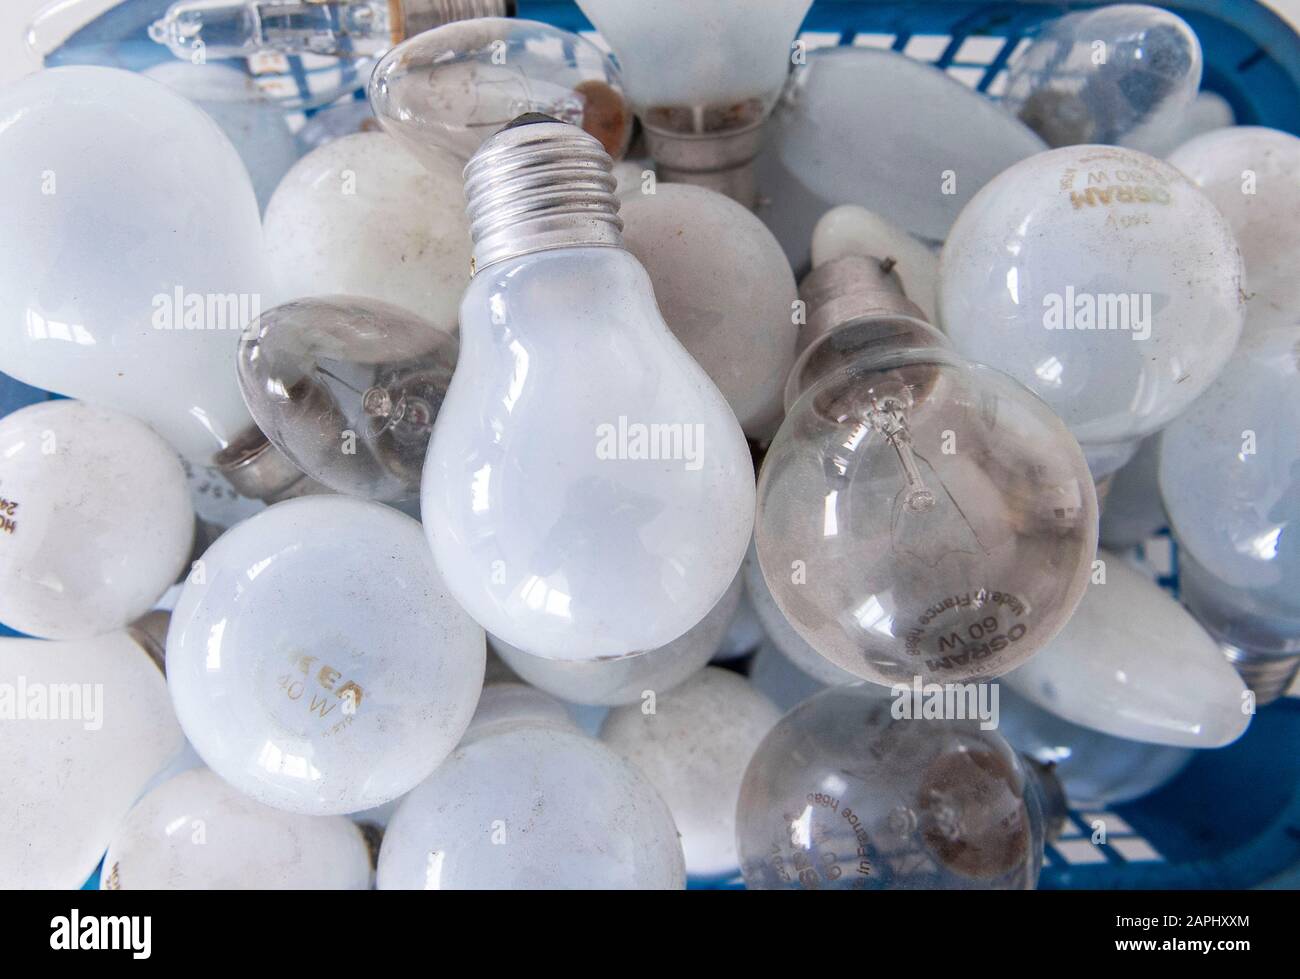 Lots of old tungsten incandescent light bulbs. Stock Photo